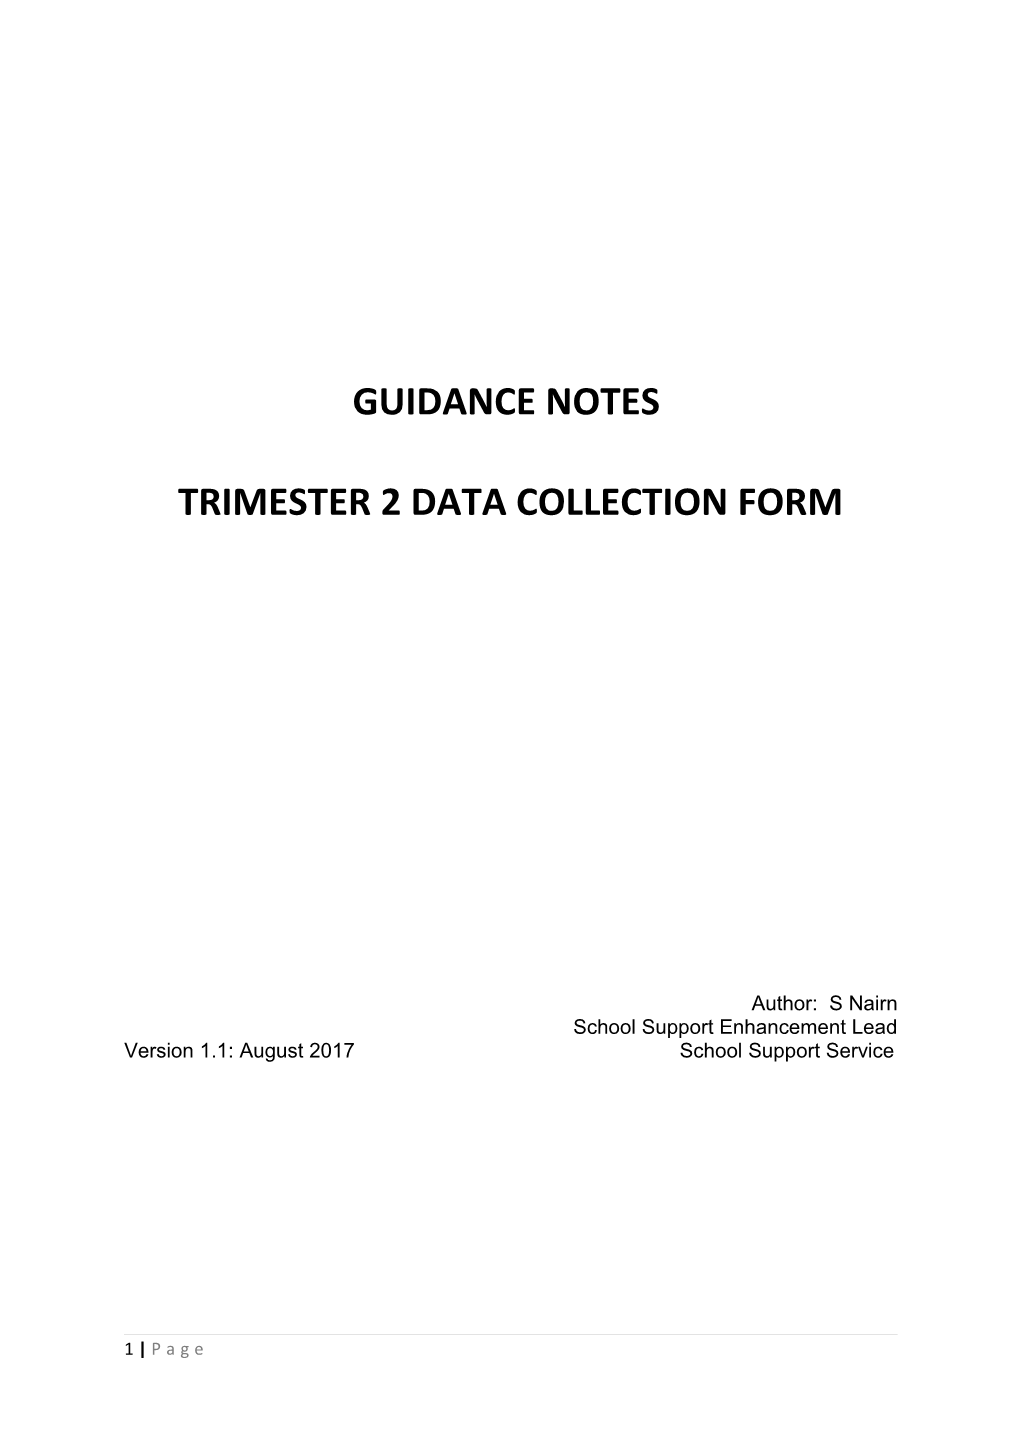 Trimester 2 Data Collection Form